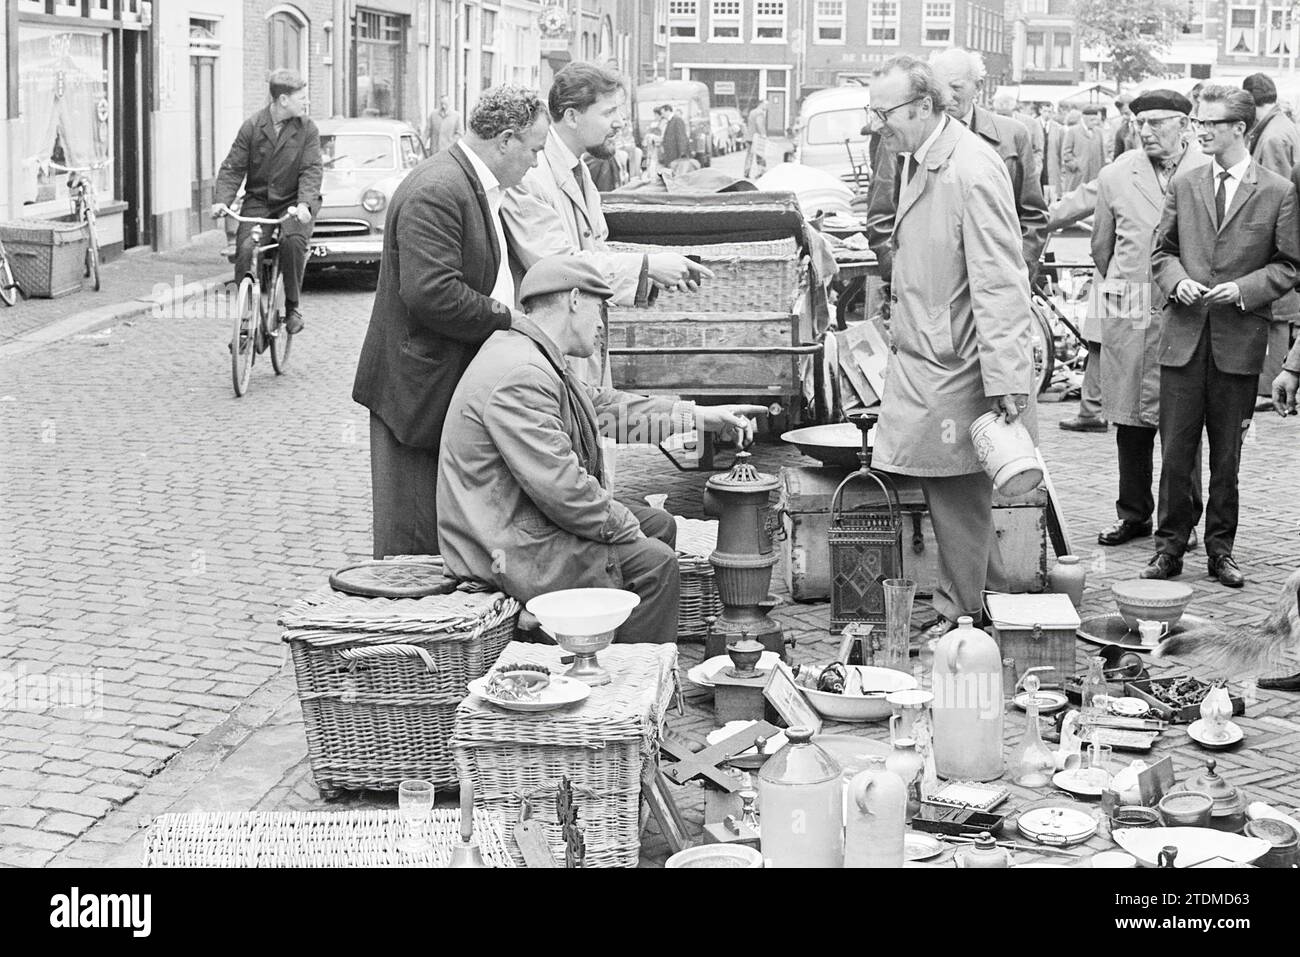 Market, Whizgle News from the Past, Tailored for the Future. Explore historical narratives, Dutch The Netherlands agency image with a modern perspective, bridging the gap between yesterday's events and tomorrow's insights. A timeless journey shaping the stories that shape our future Stock Photo